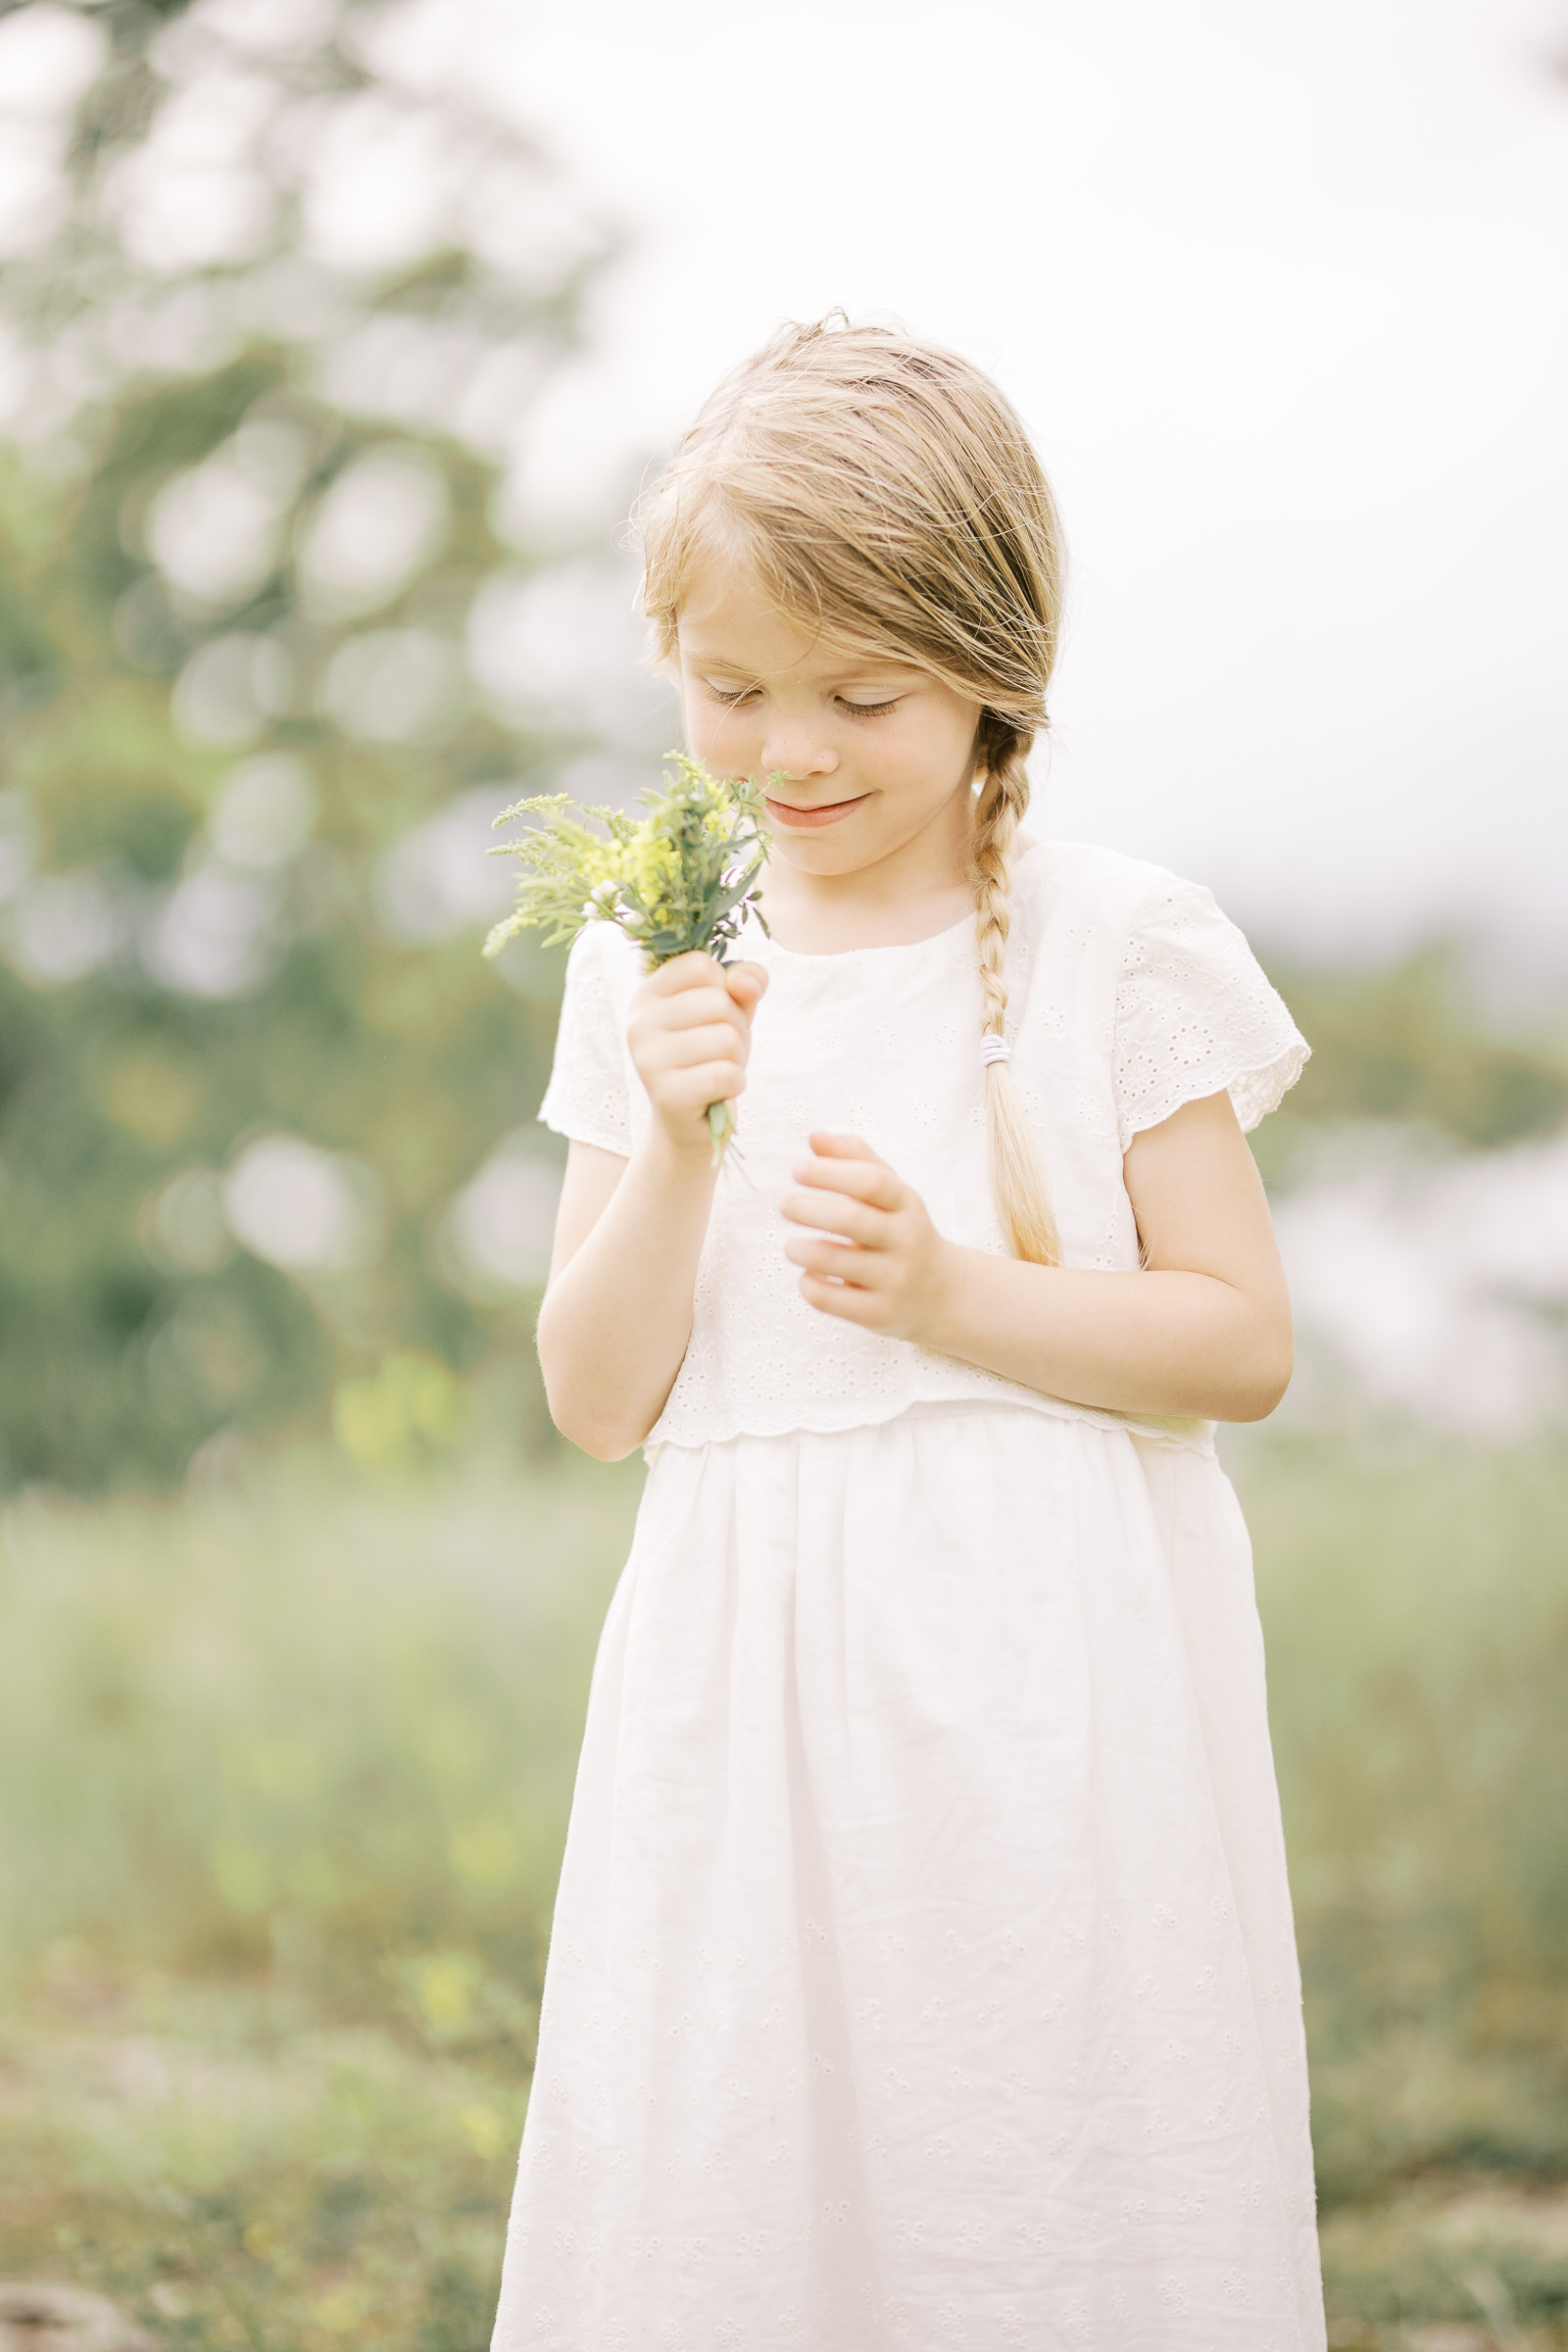 Things to Do in Detroit With Kids blog post by Laurel Smith Photography features a young girl smelling a wildflower bouquet in her hands in the summertime. Detroit photography locations wildflower kid vacation Detroit, Michigan #professionaldetroitphotography #familyfundetroit #laurelsmithphotography #laurelsmithfamilyphotography #detroitfamilyphotographer #thingstodoindetroitwithkids #detroitfamilyactivities #familyphotographerMichigan #DetroitFamilies #LaurelSmithDetroit